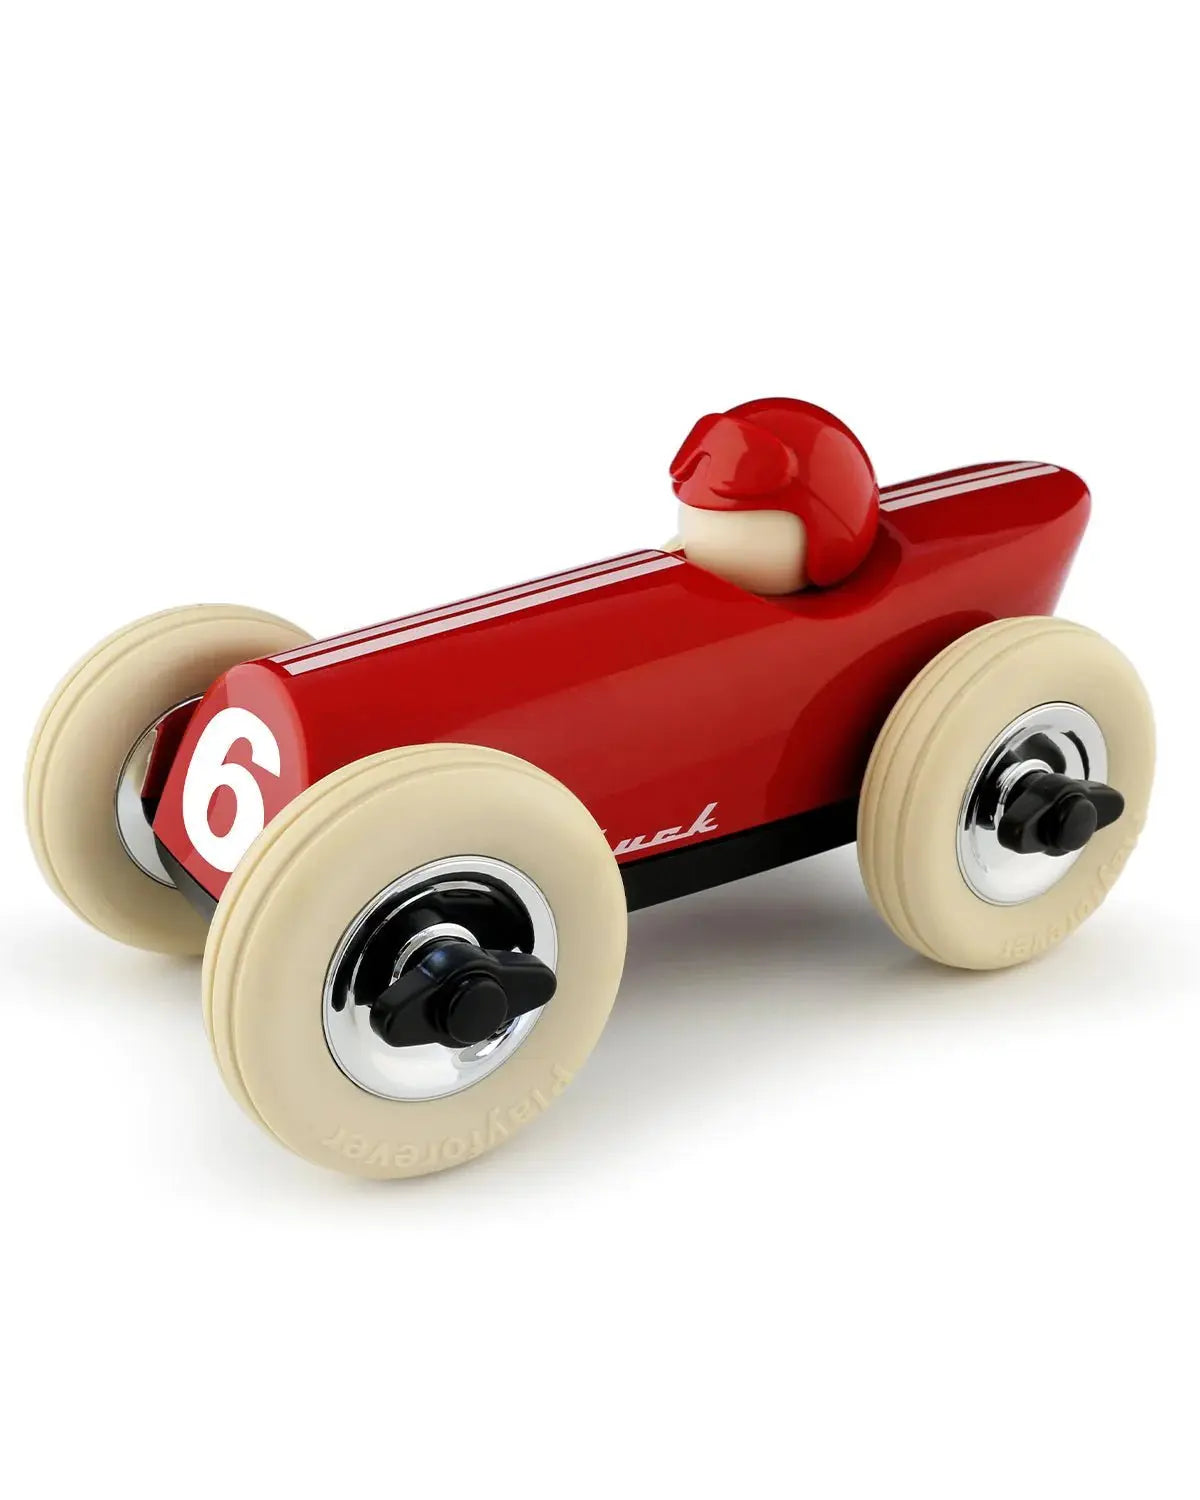 Dark Orange Car Verve Malibu, Wide Profile Design, Low-to-the-Ground Rubber Tyres, Collectible Toy Car  Playforever   